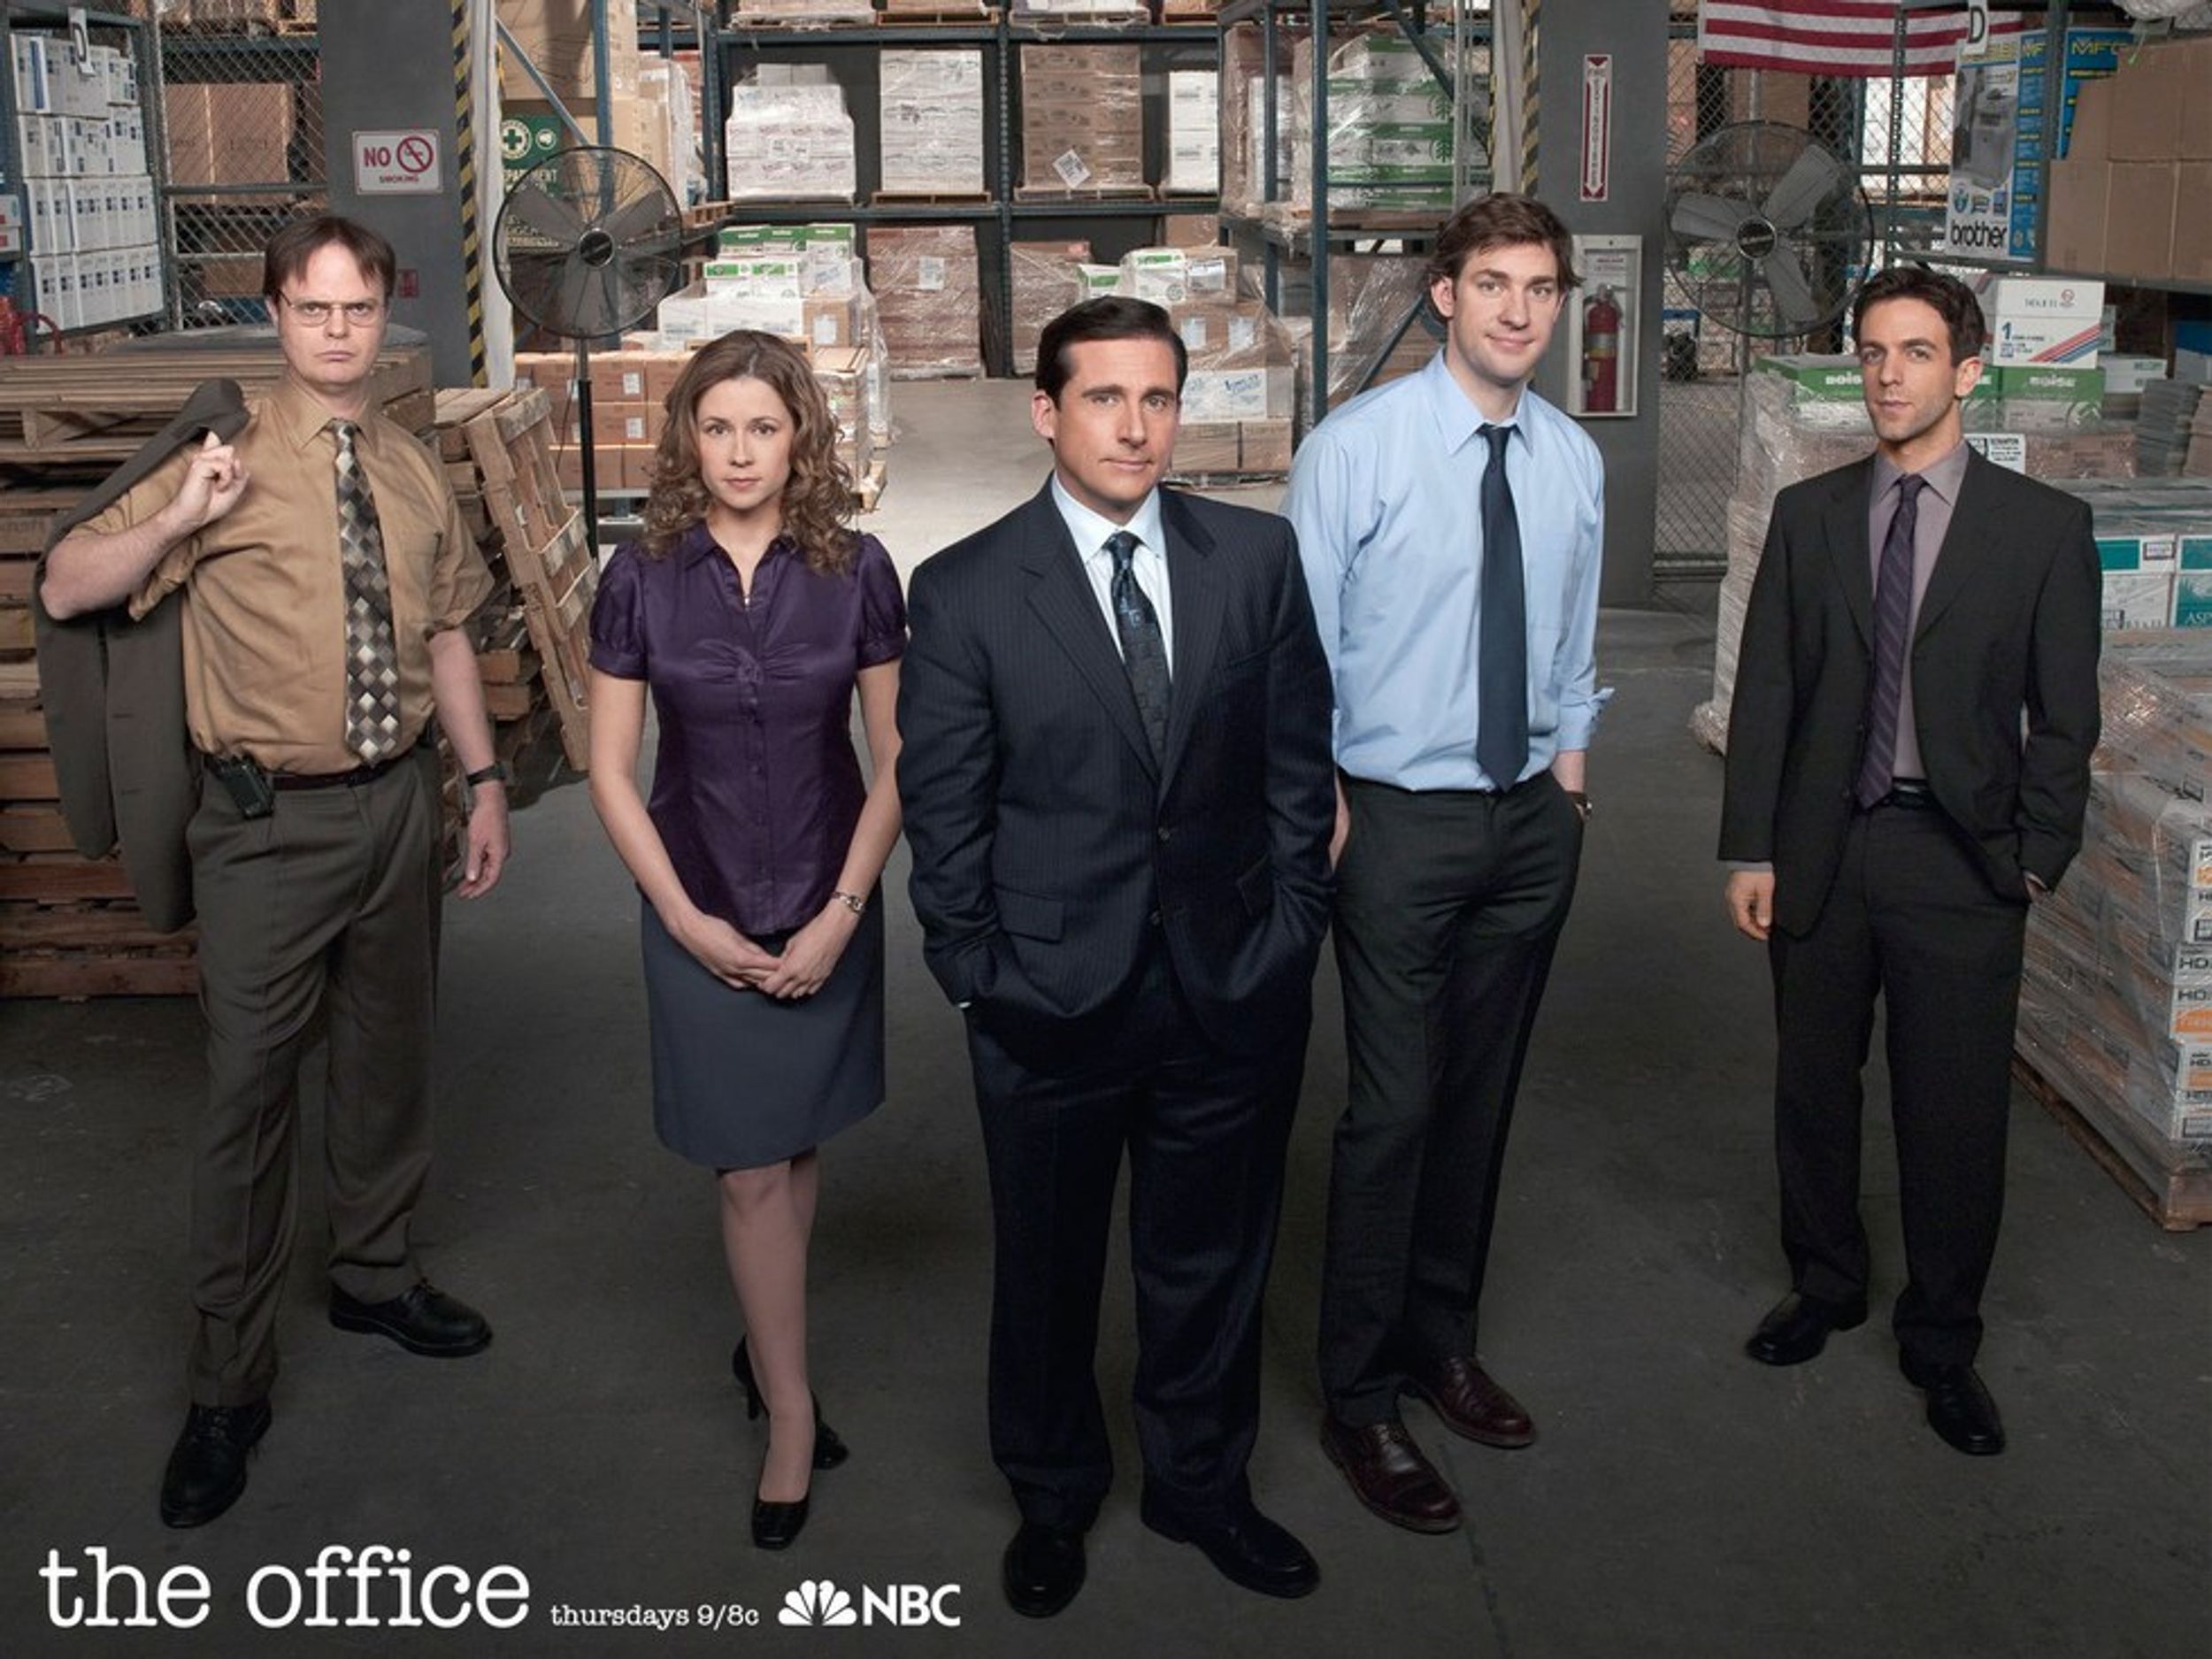 The Summer Blues As Told by the Cast Of 'The Office'